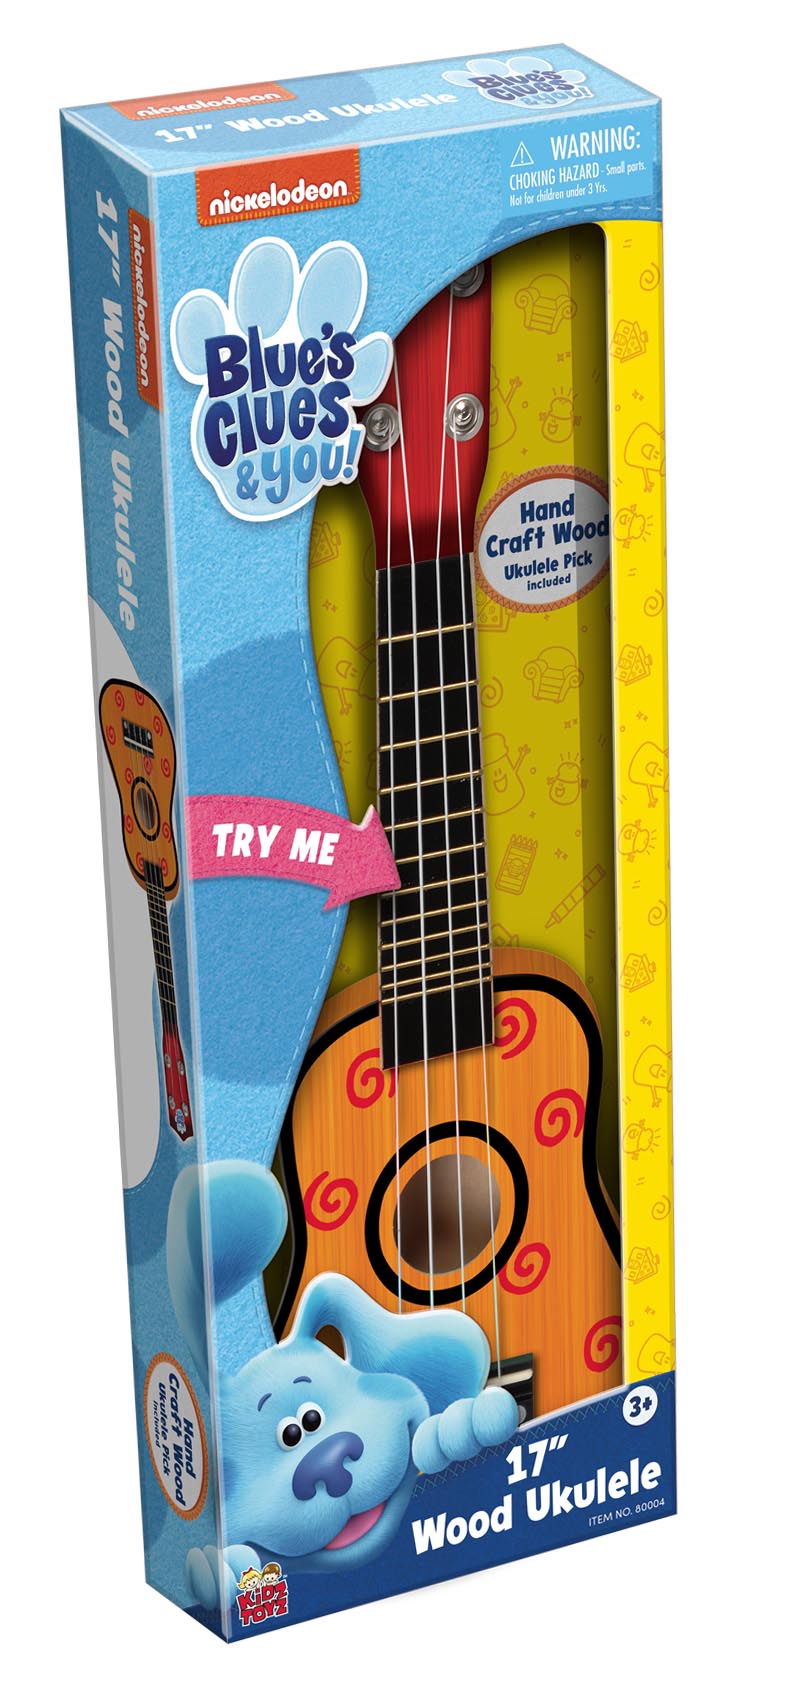 The Beat Goes On With a Full Line of Musical Instruments Celebrating  Blue’s Clues & You! image